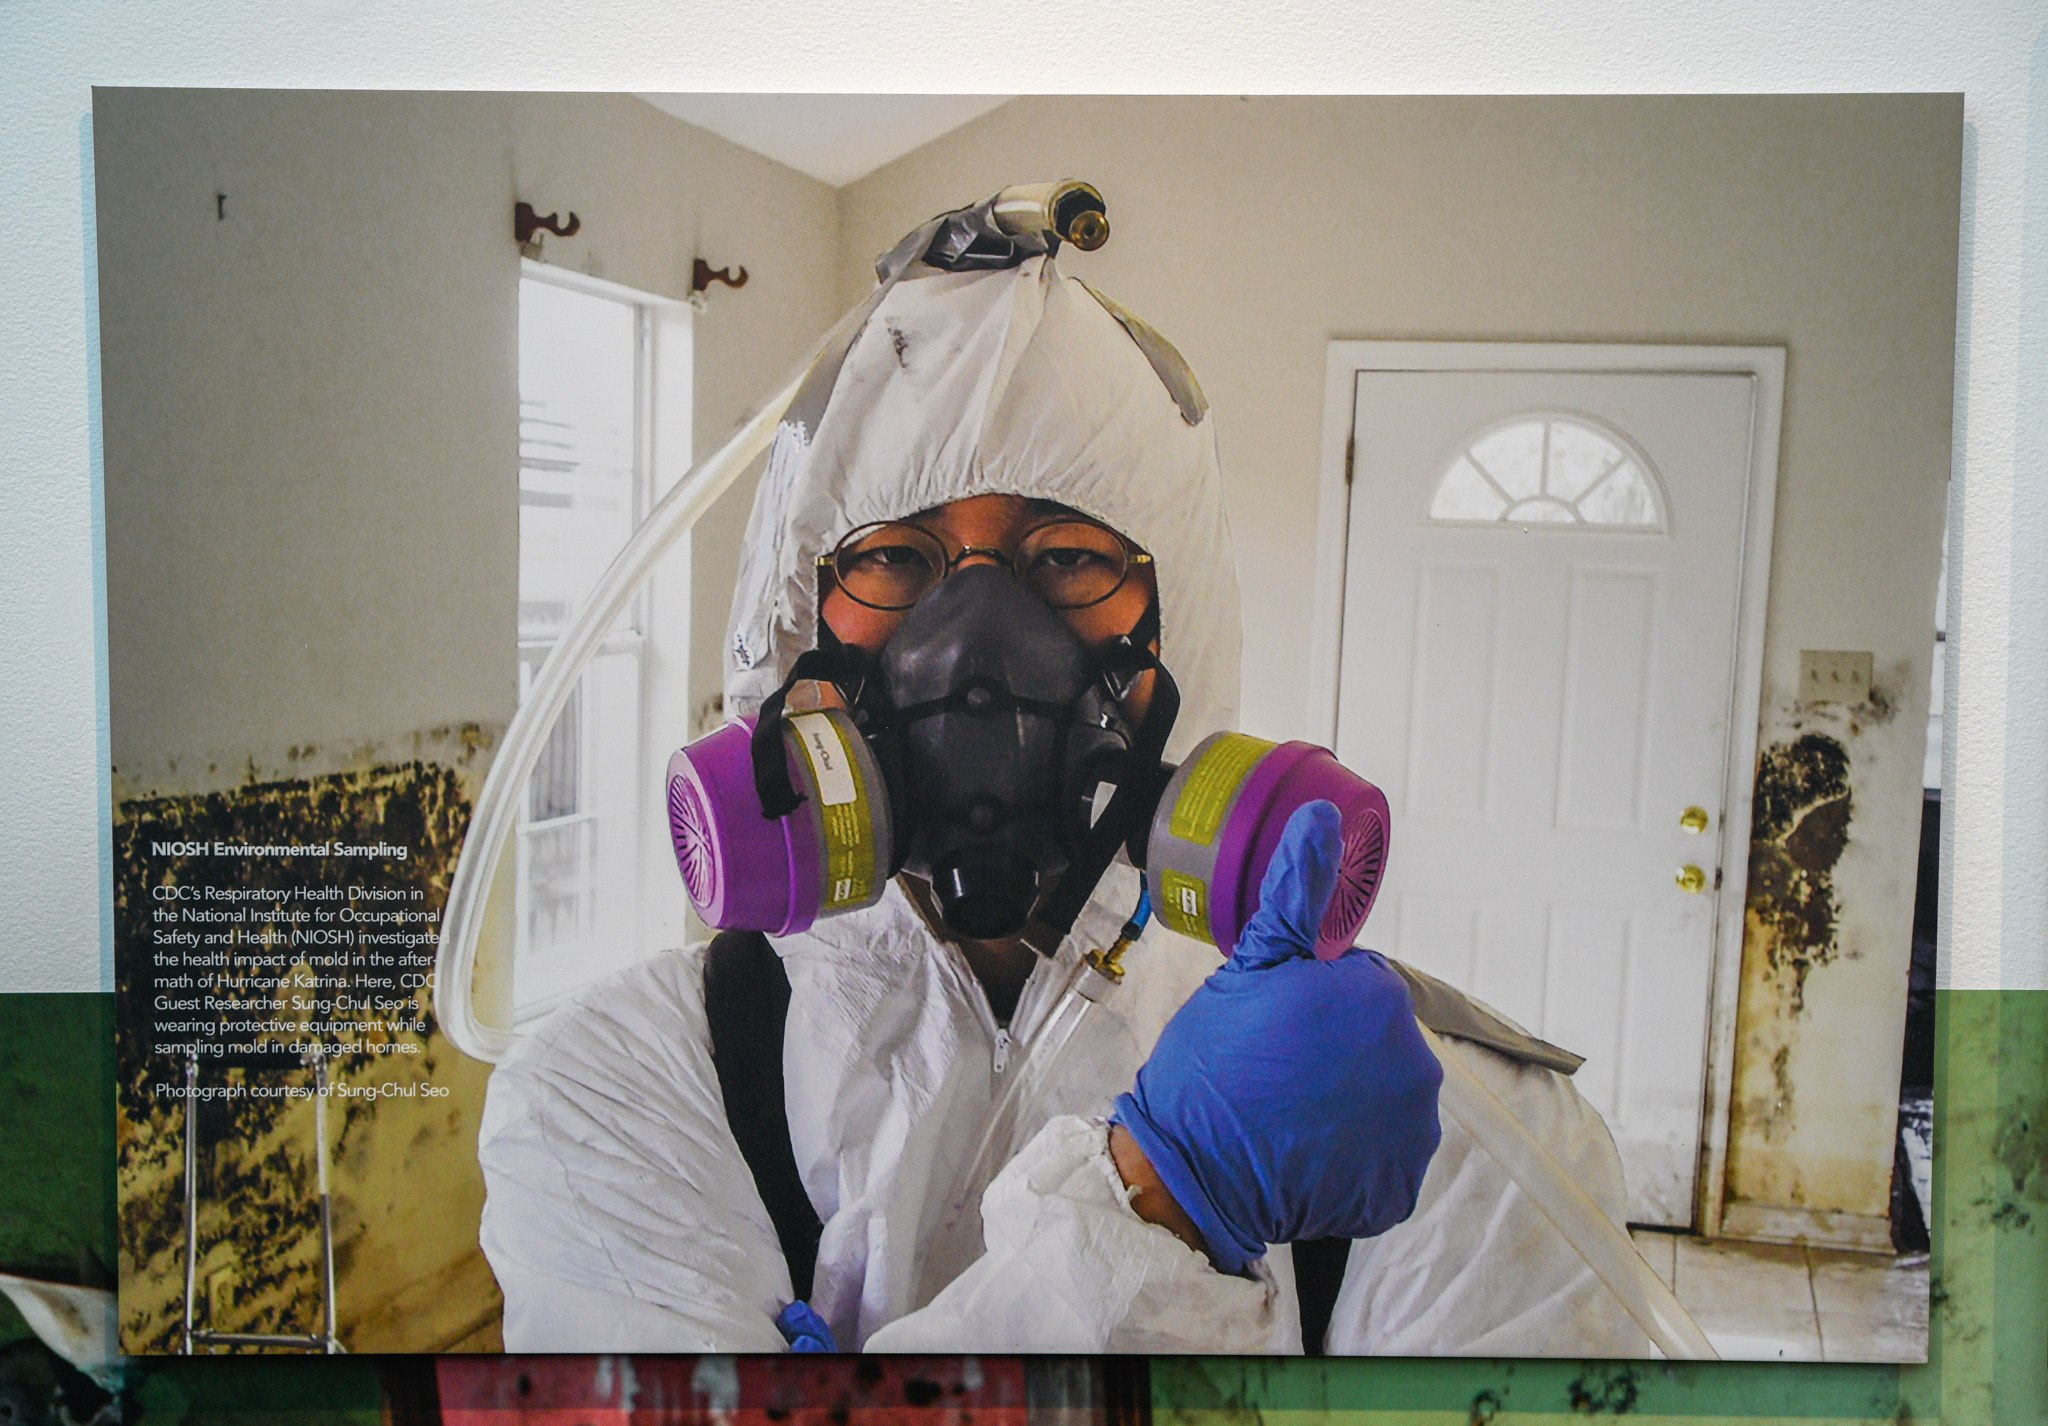 A poster at the David J. Sencer Centres for Disease Control and Prevention in Atlanta, in the US state of Georgia, highlights how CDC scientists work in more than 60 countries worldwide, tackling health catastrophes such as the Covid-19 pandemic. Photo: Ronan O’Connell